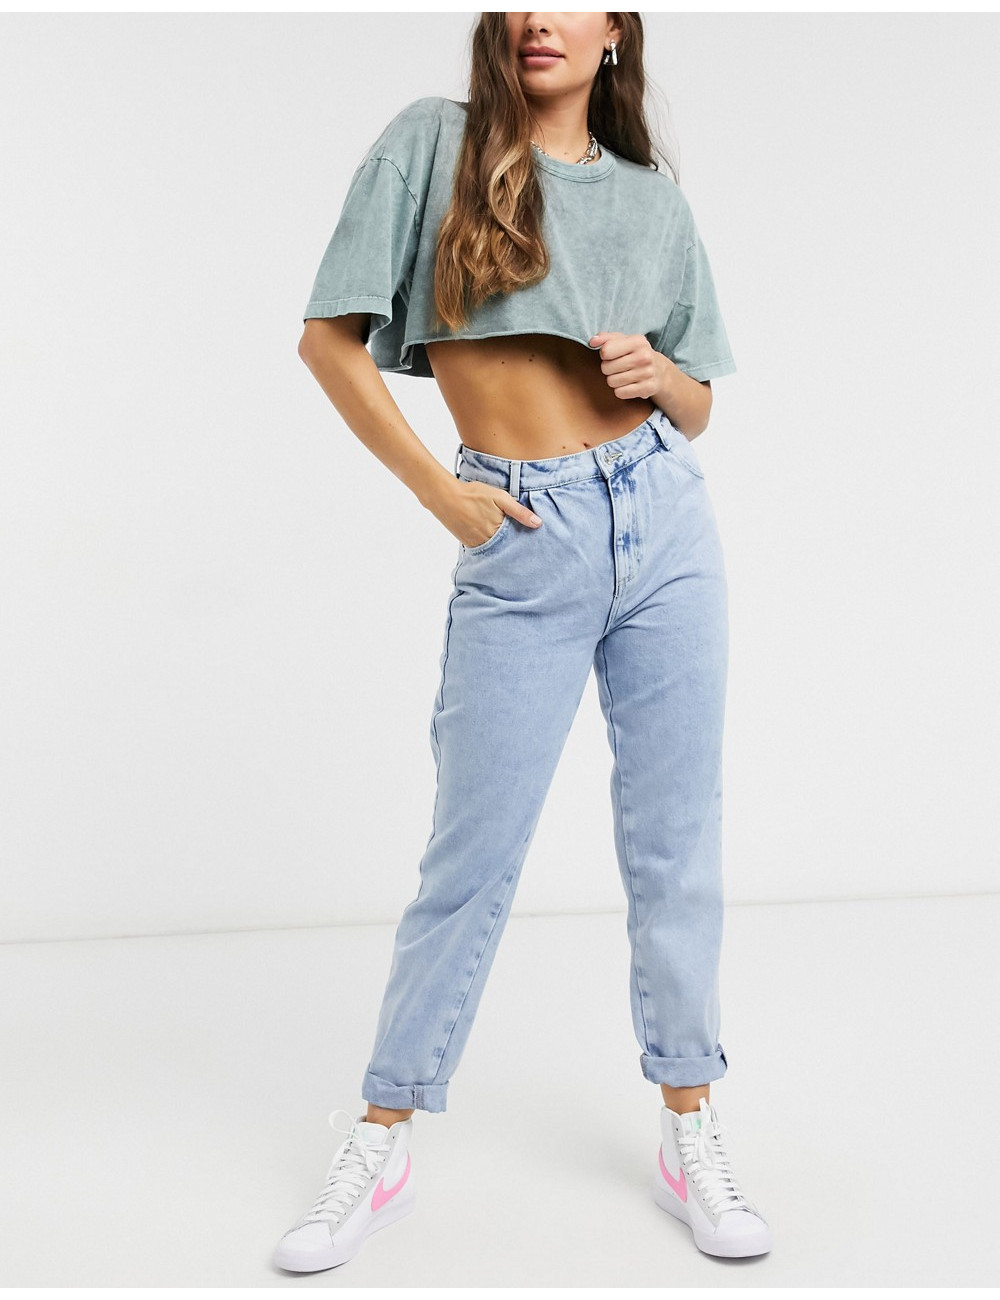 New Look balloon jeans in...